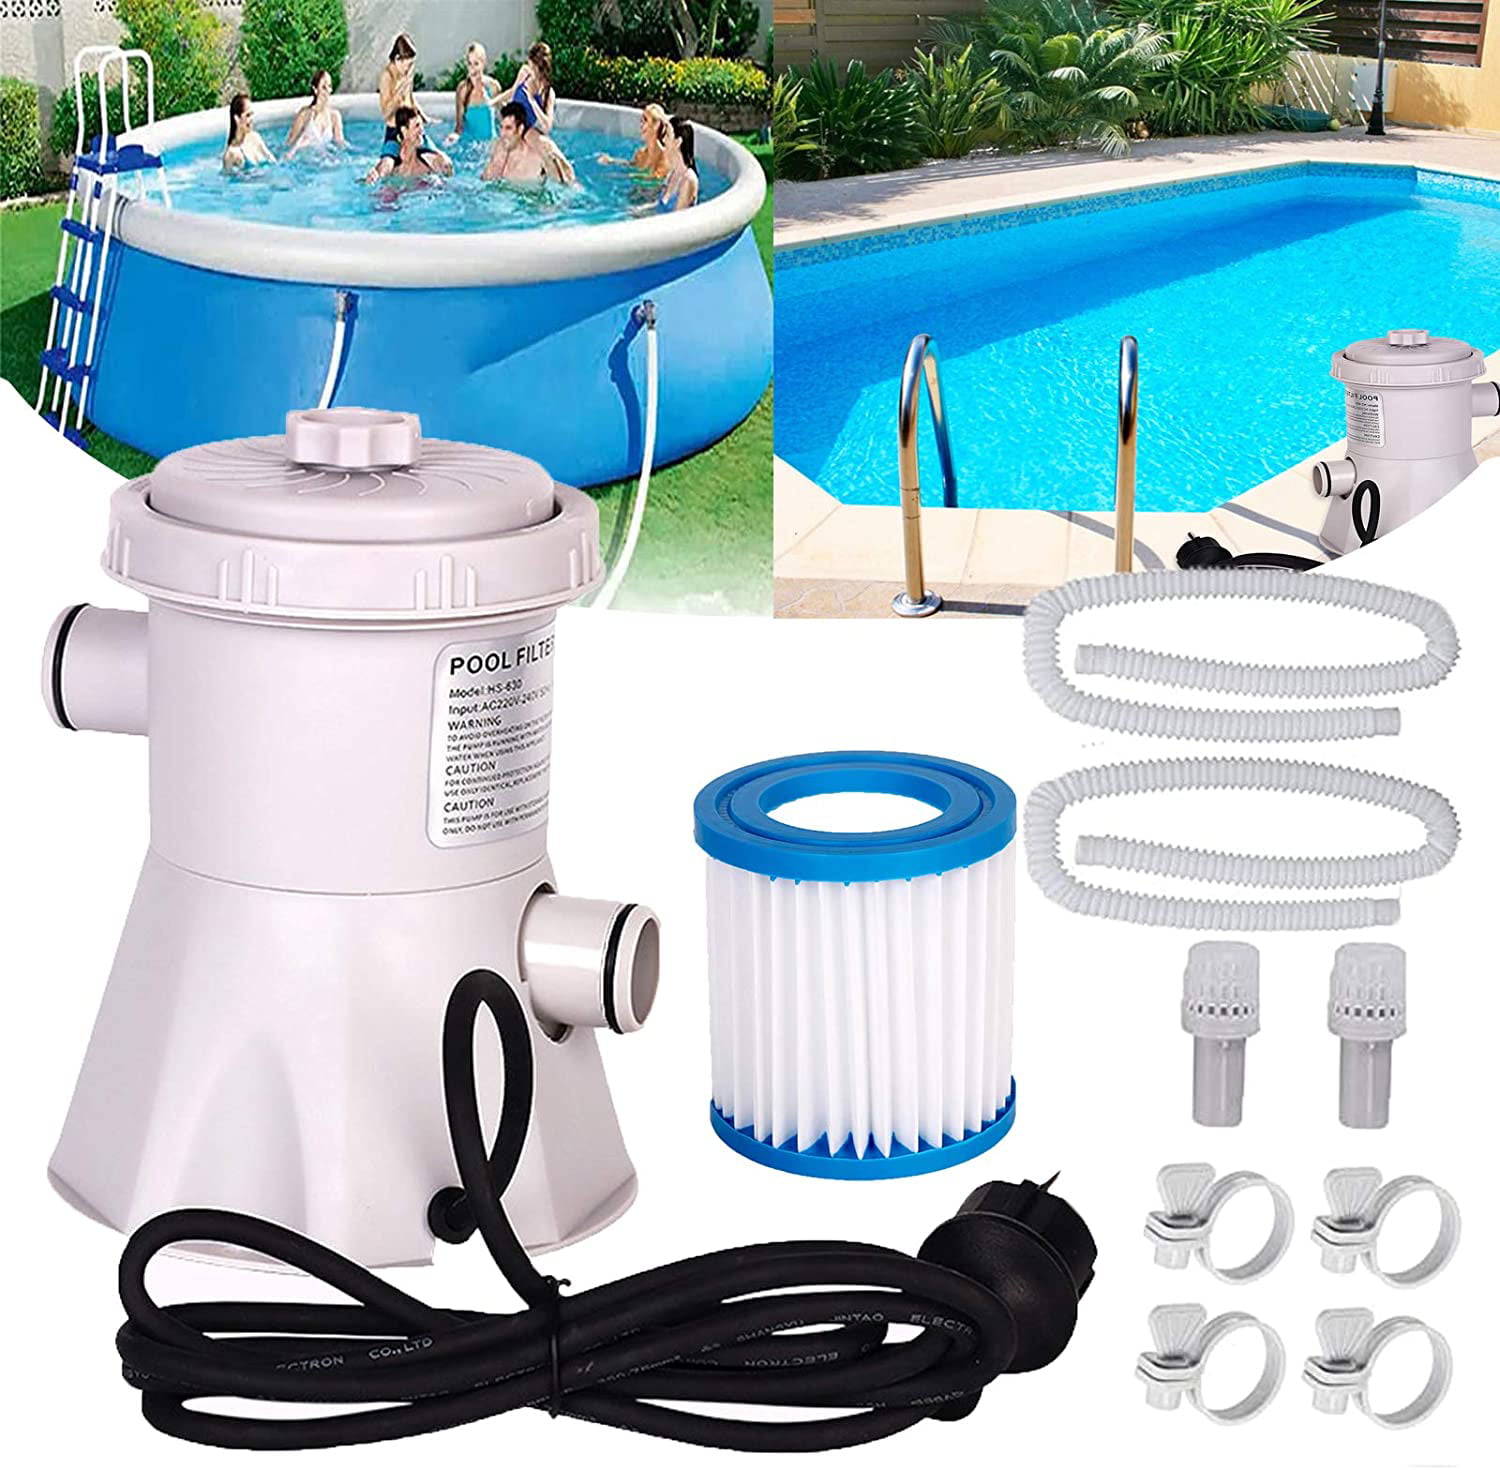 300GAL Electric Swimming Pool Filter Pump For Above Ground Pools Cleaning Tools 